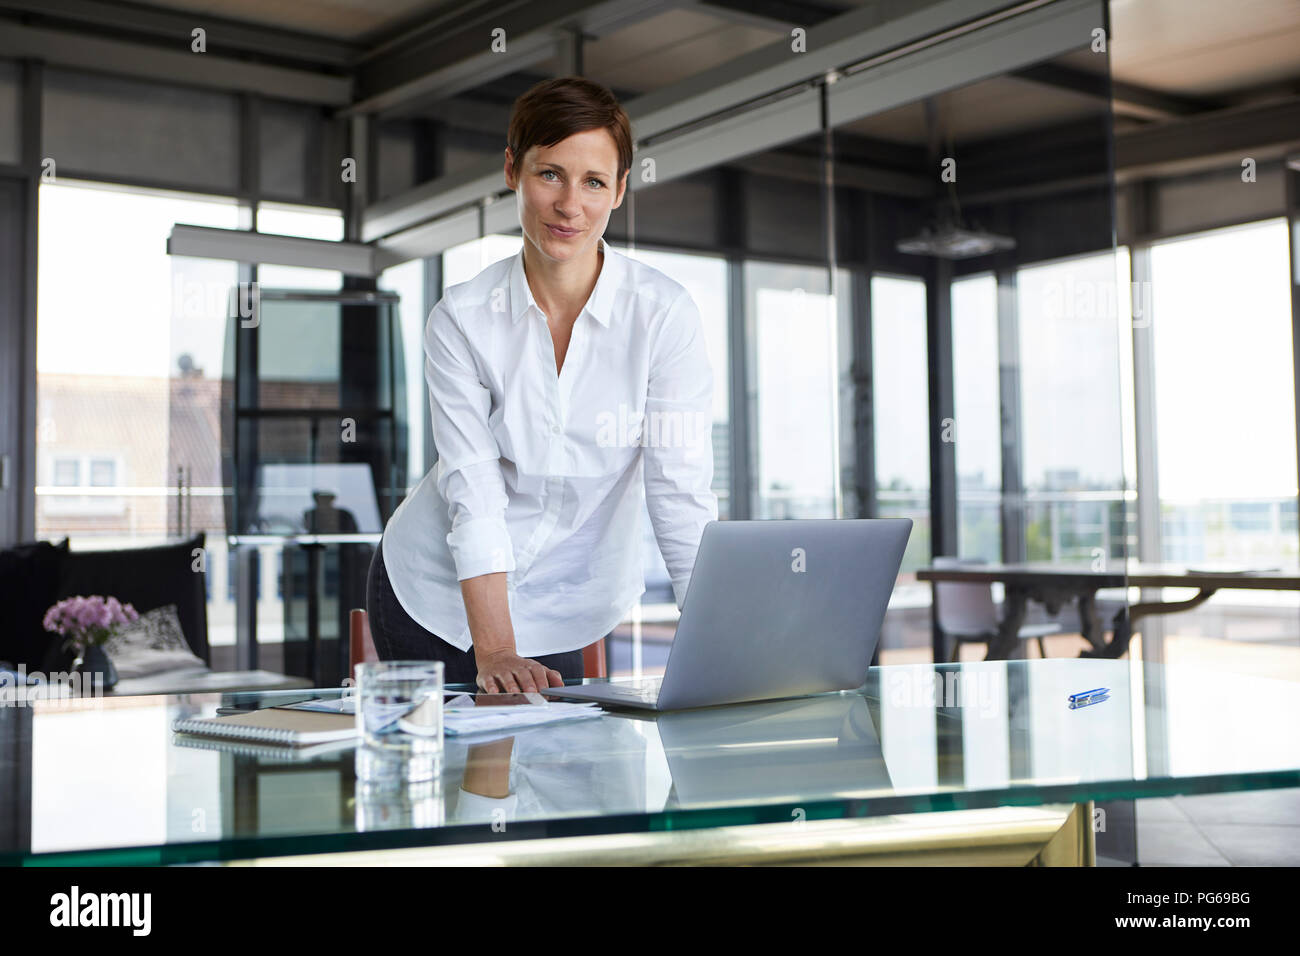 Portrait of confident businesswoman standing at glass table in office with laptop Stock Photo